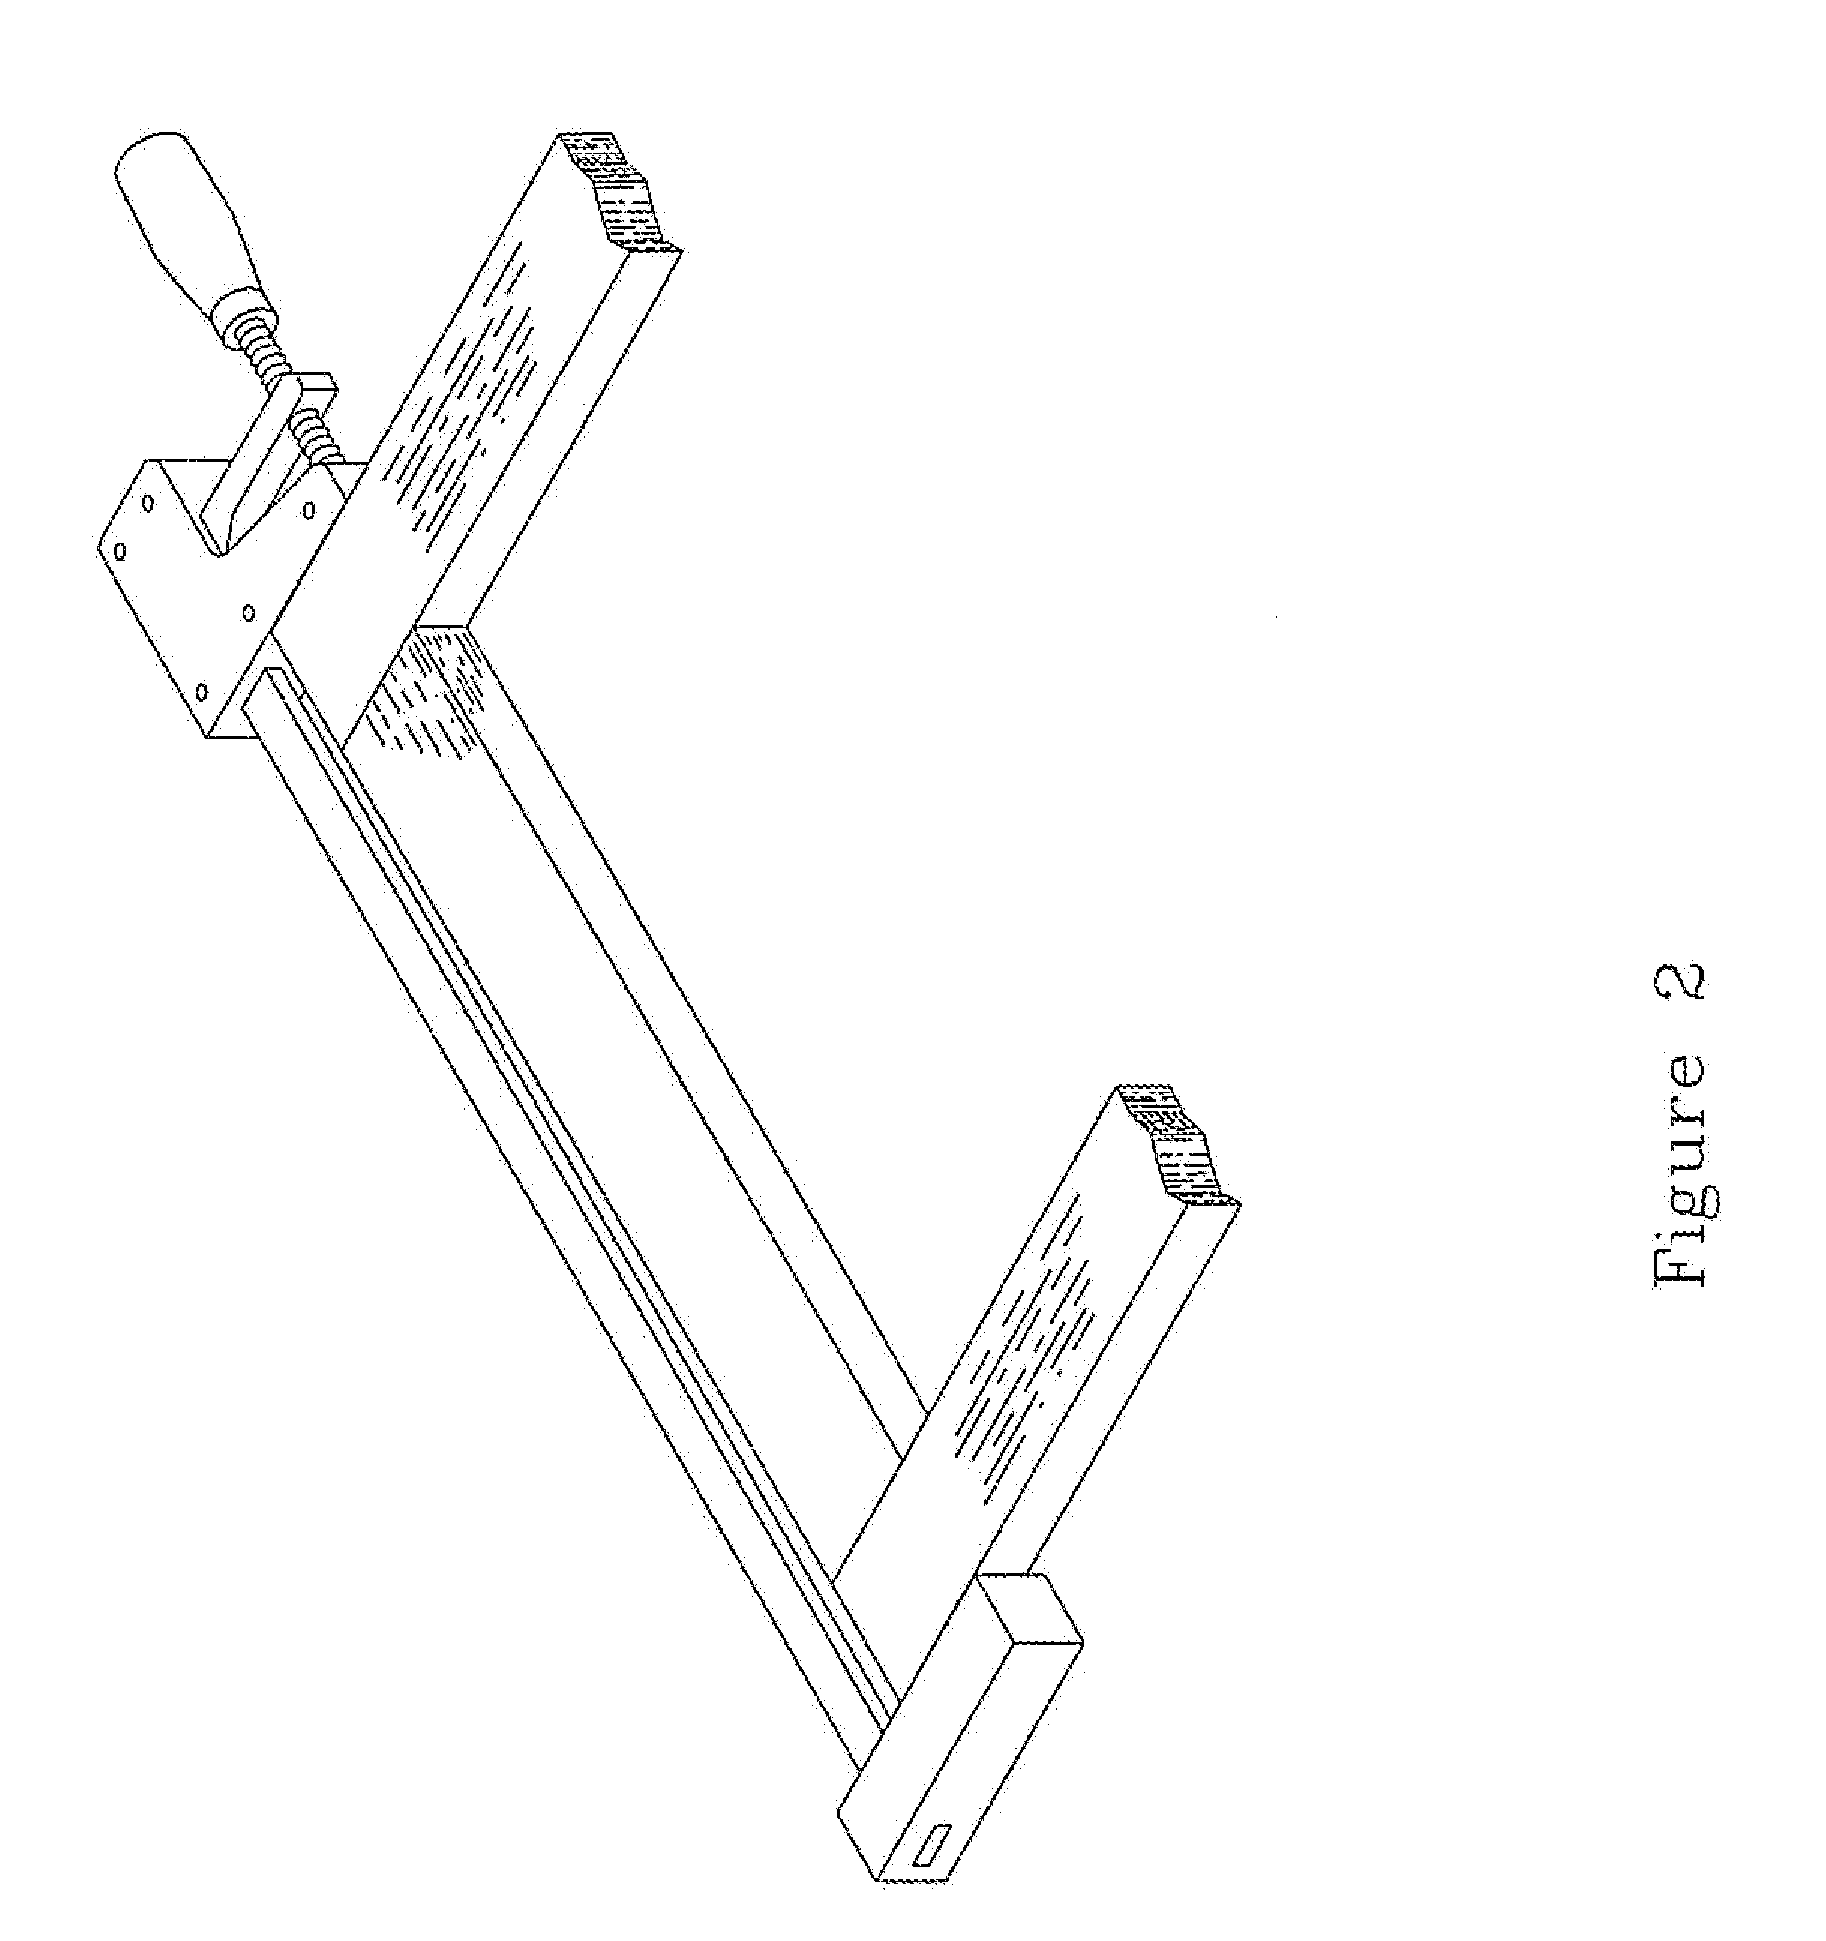 Method for Joining Workpieces Together and Product Made Thereby